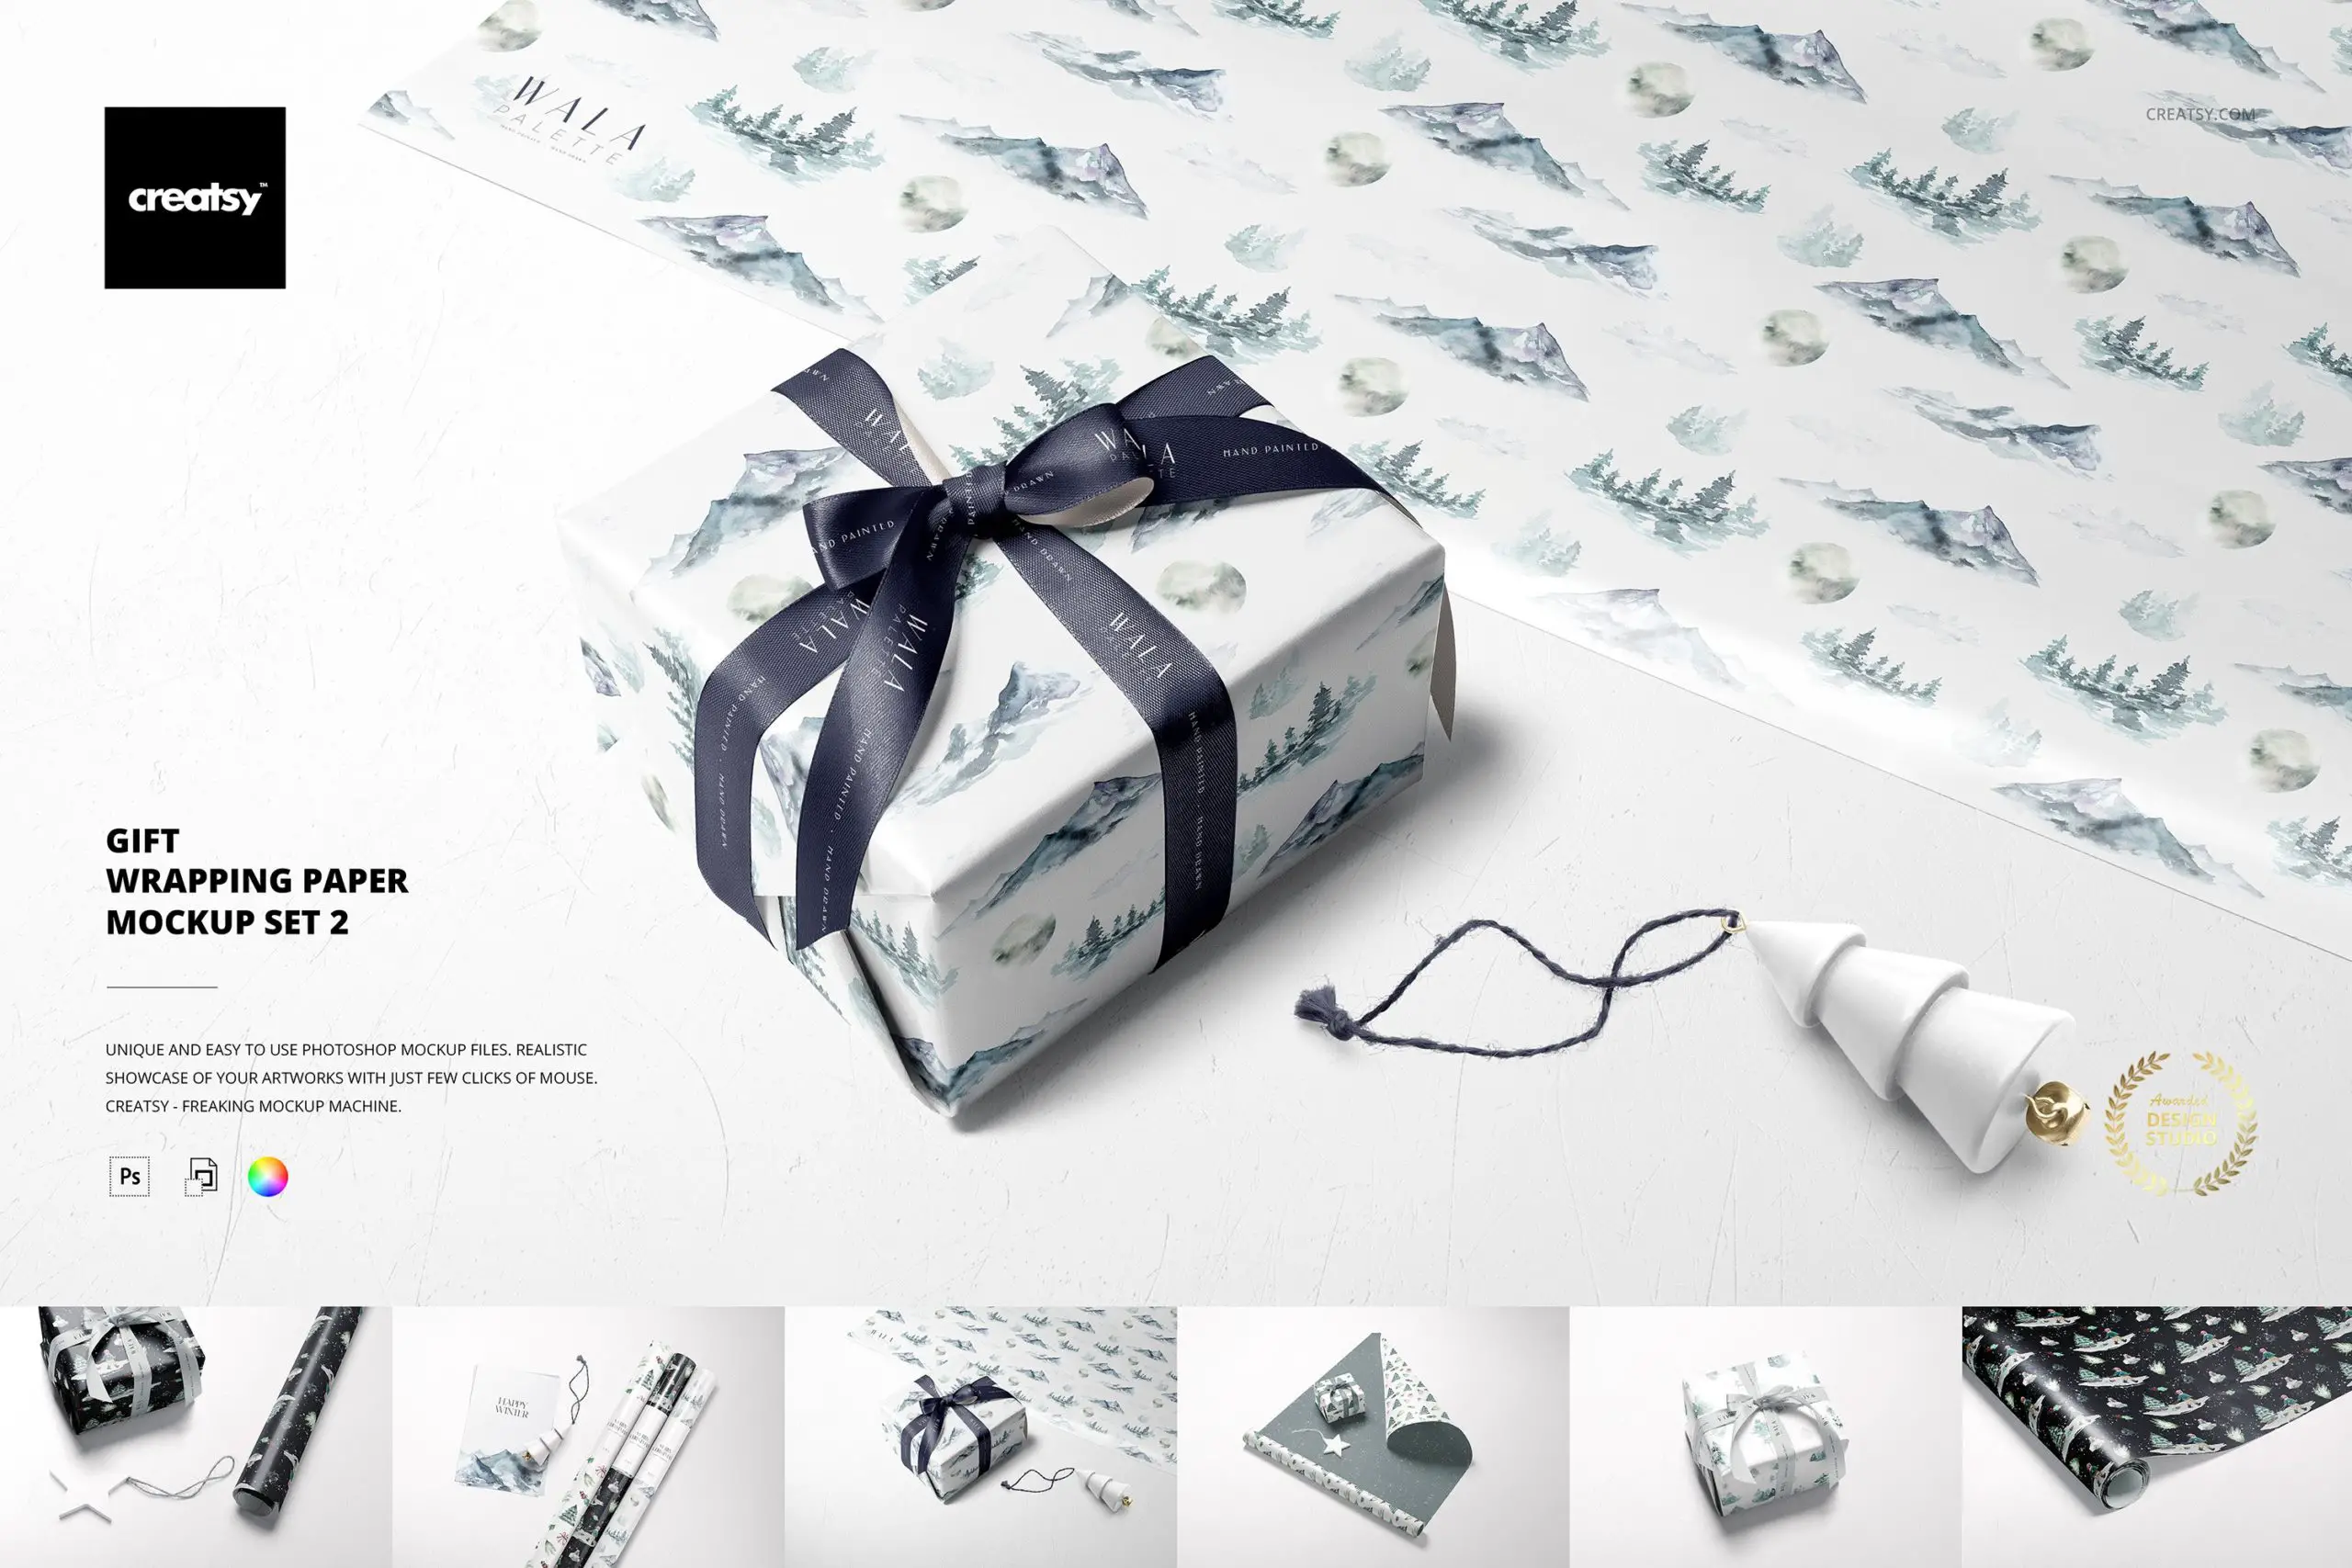 Gift Wrapping Paper Mockup Set 2 - 